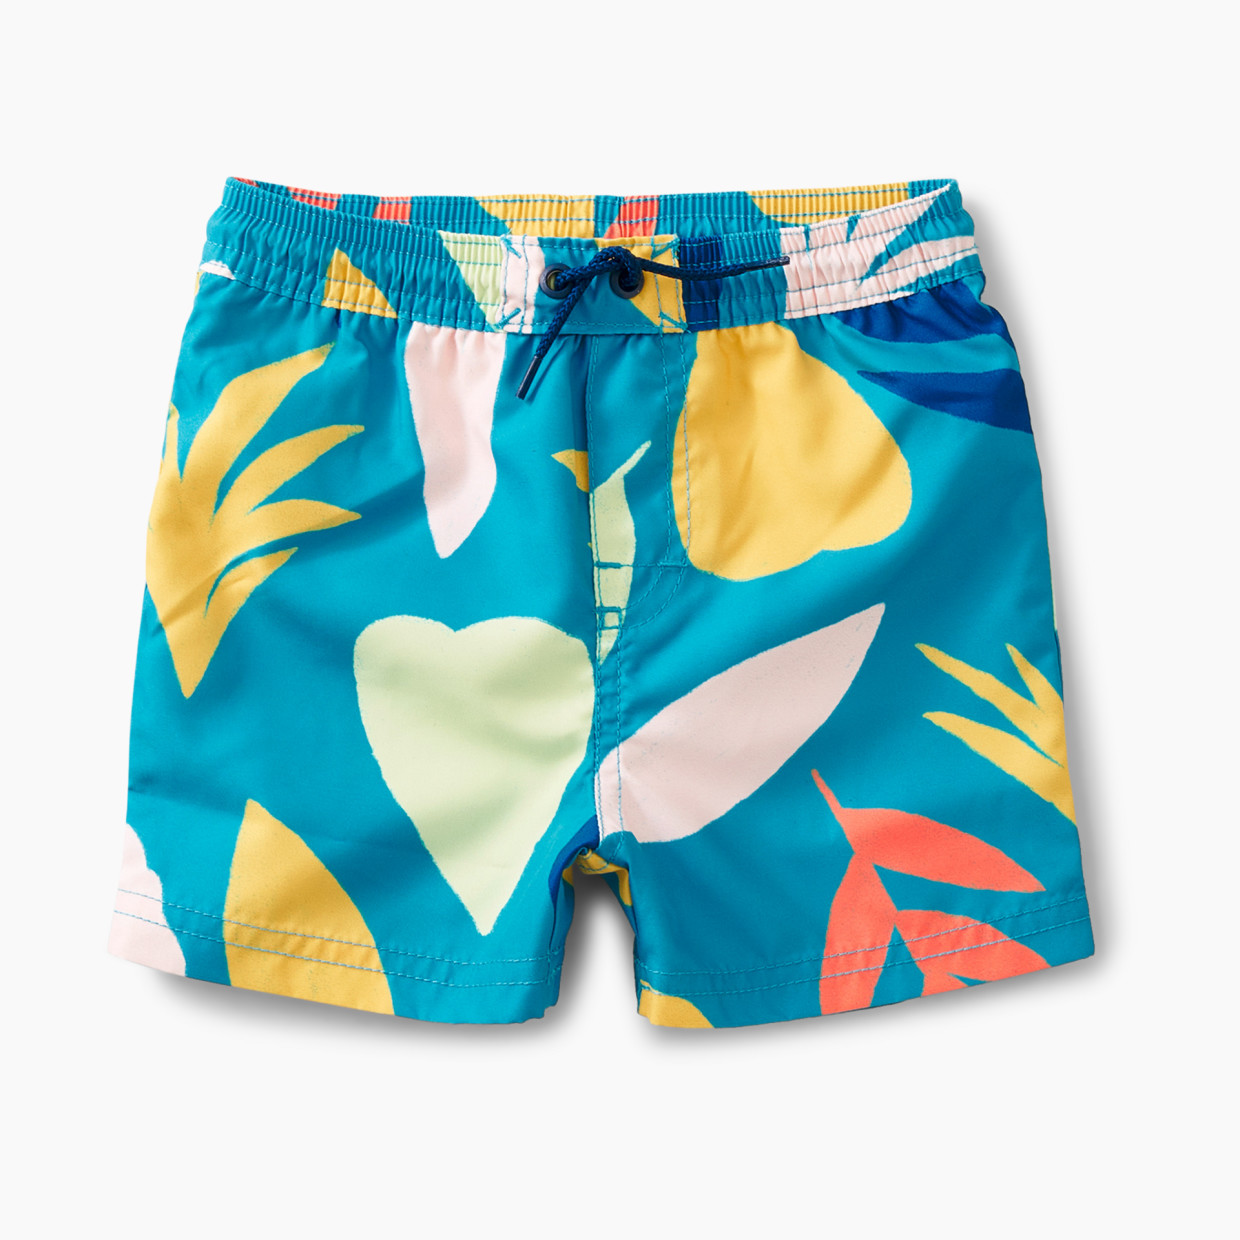 Tea Collection Swim Trunks - Island Breeze In Teal, 3-6 Months.